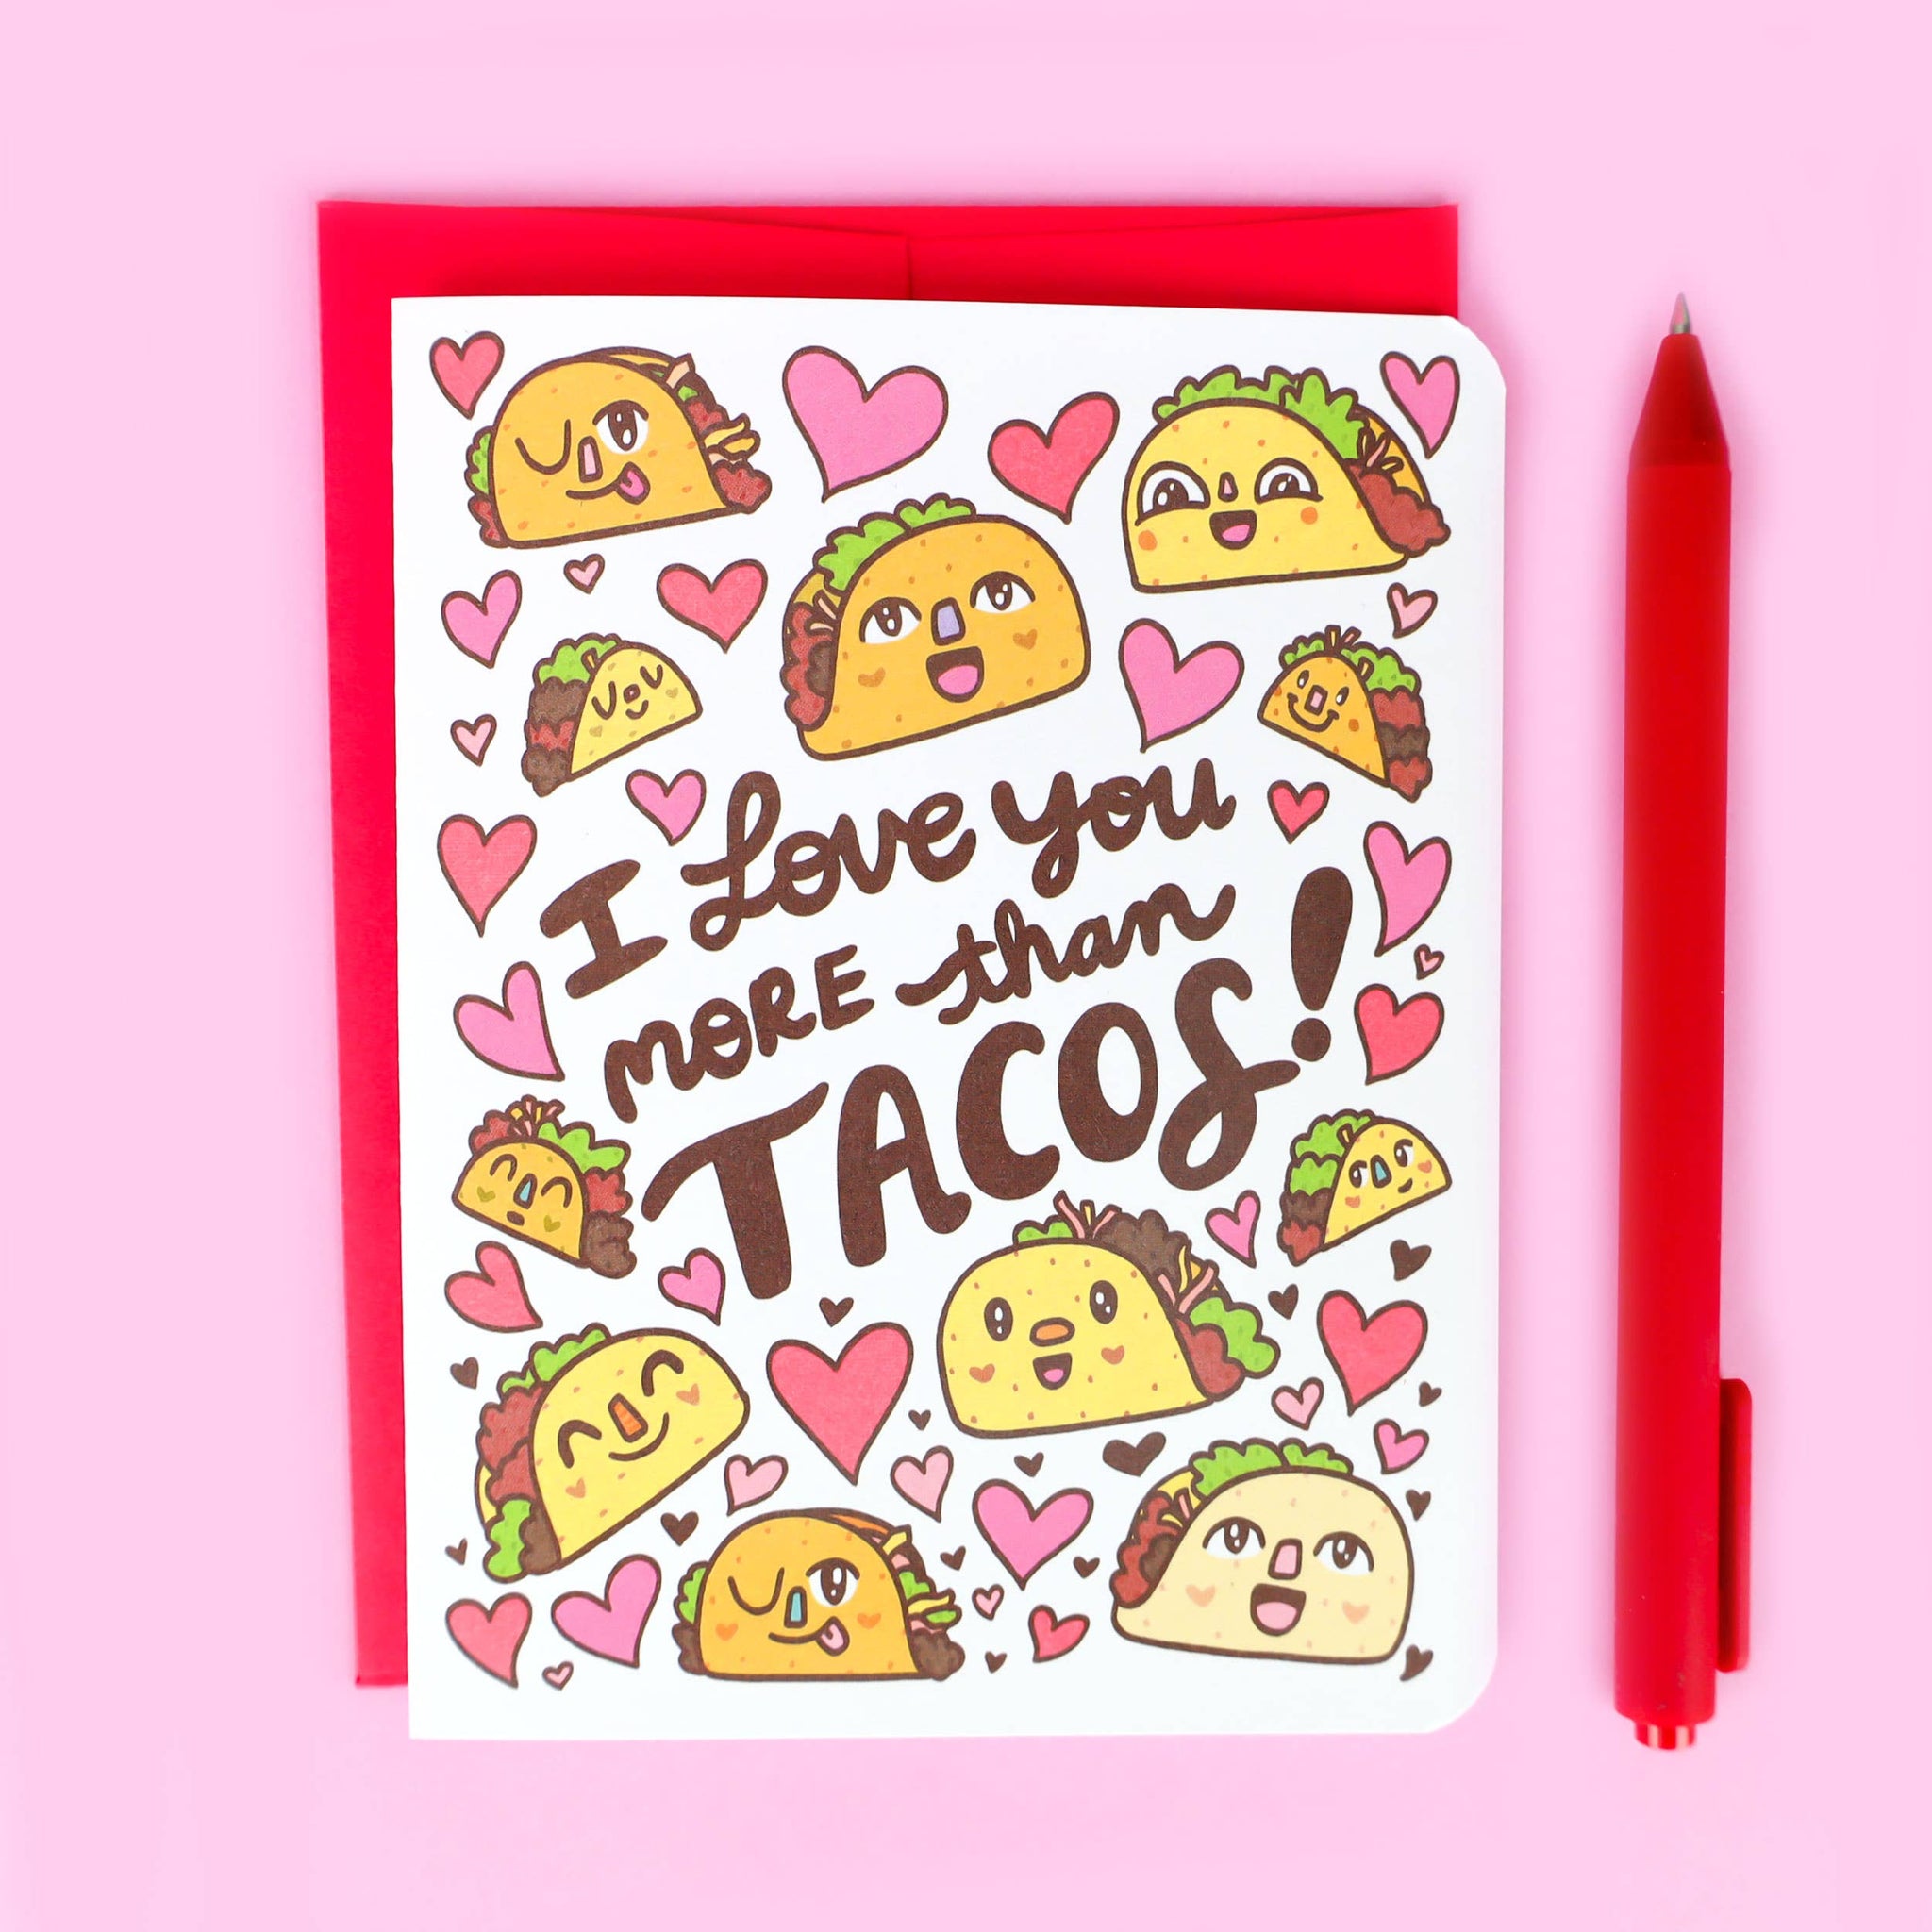 Turtle Soup Greeting Cards - I Love You More Than Tacos